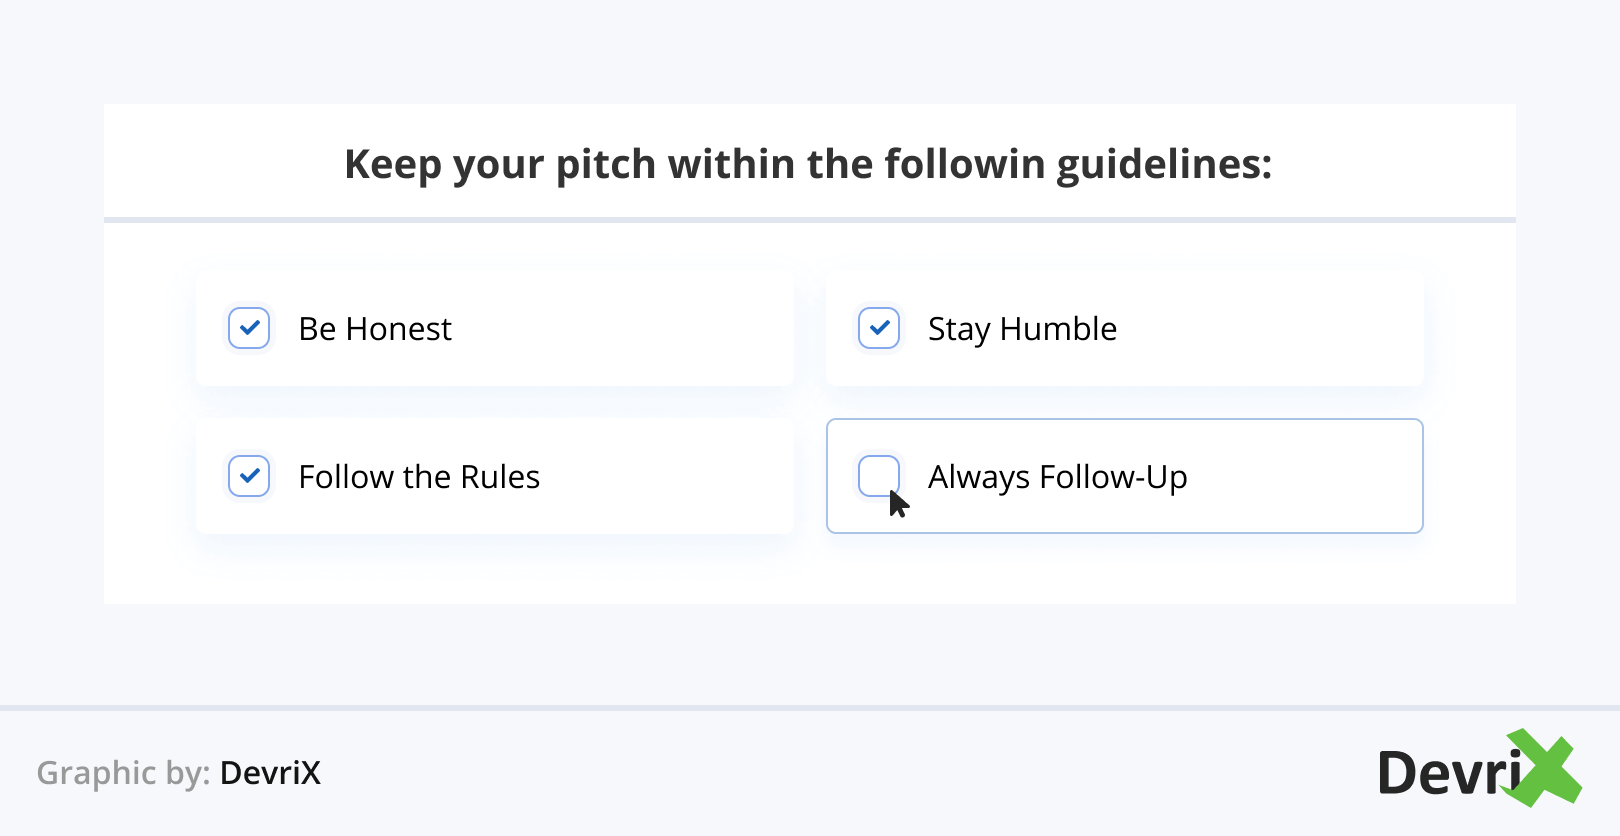 Keep your pitch within the following guidelines